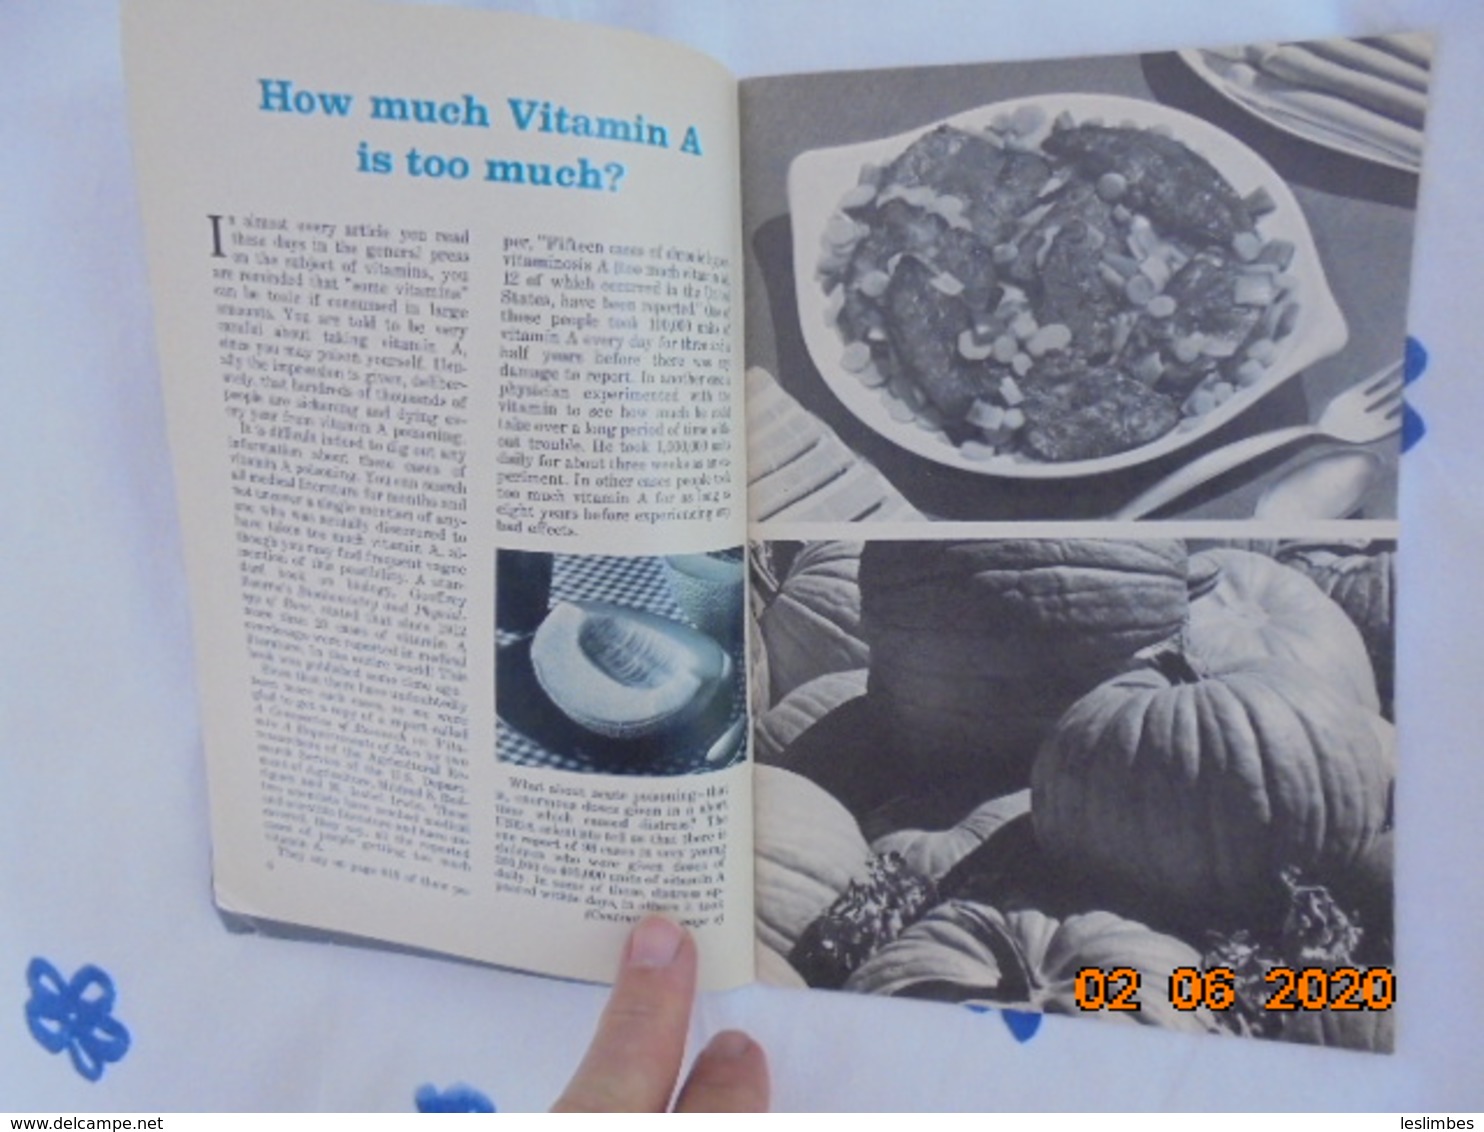 Today's Living, Volume 7 (April 1976) Number 4. Syndicate Magazines / Howard's Nutrition Of Newport Beach - Alternative Medizin